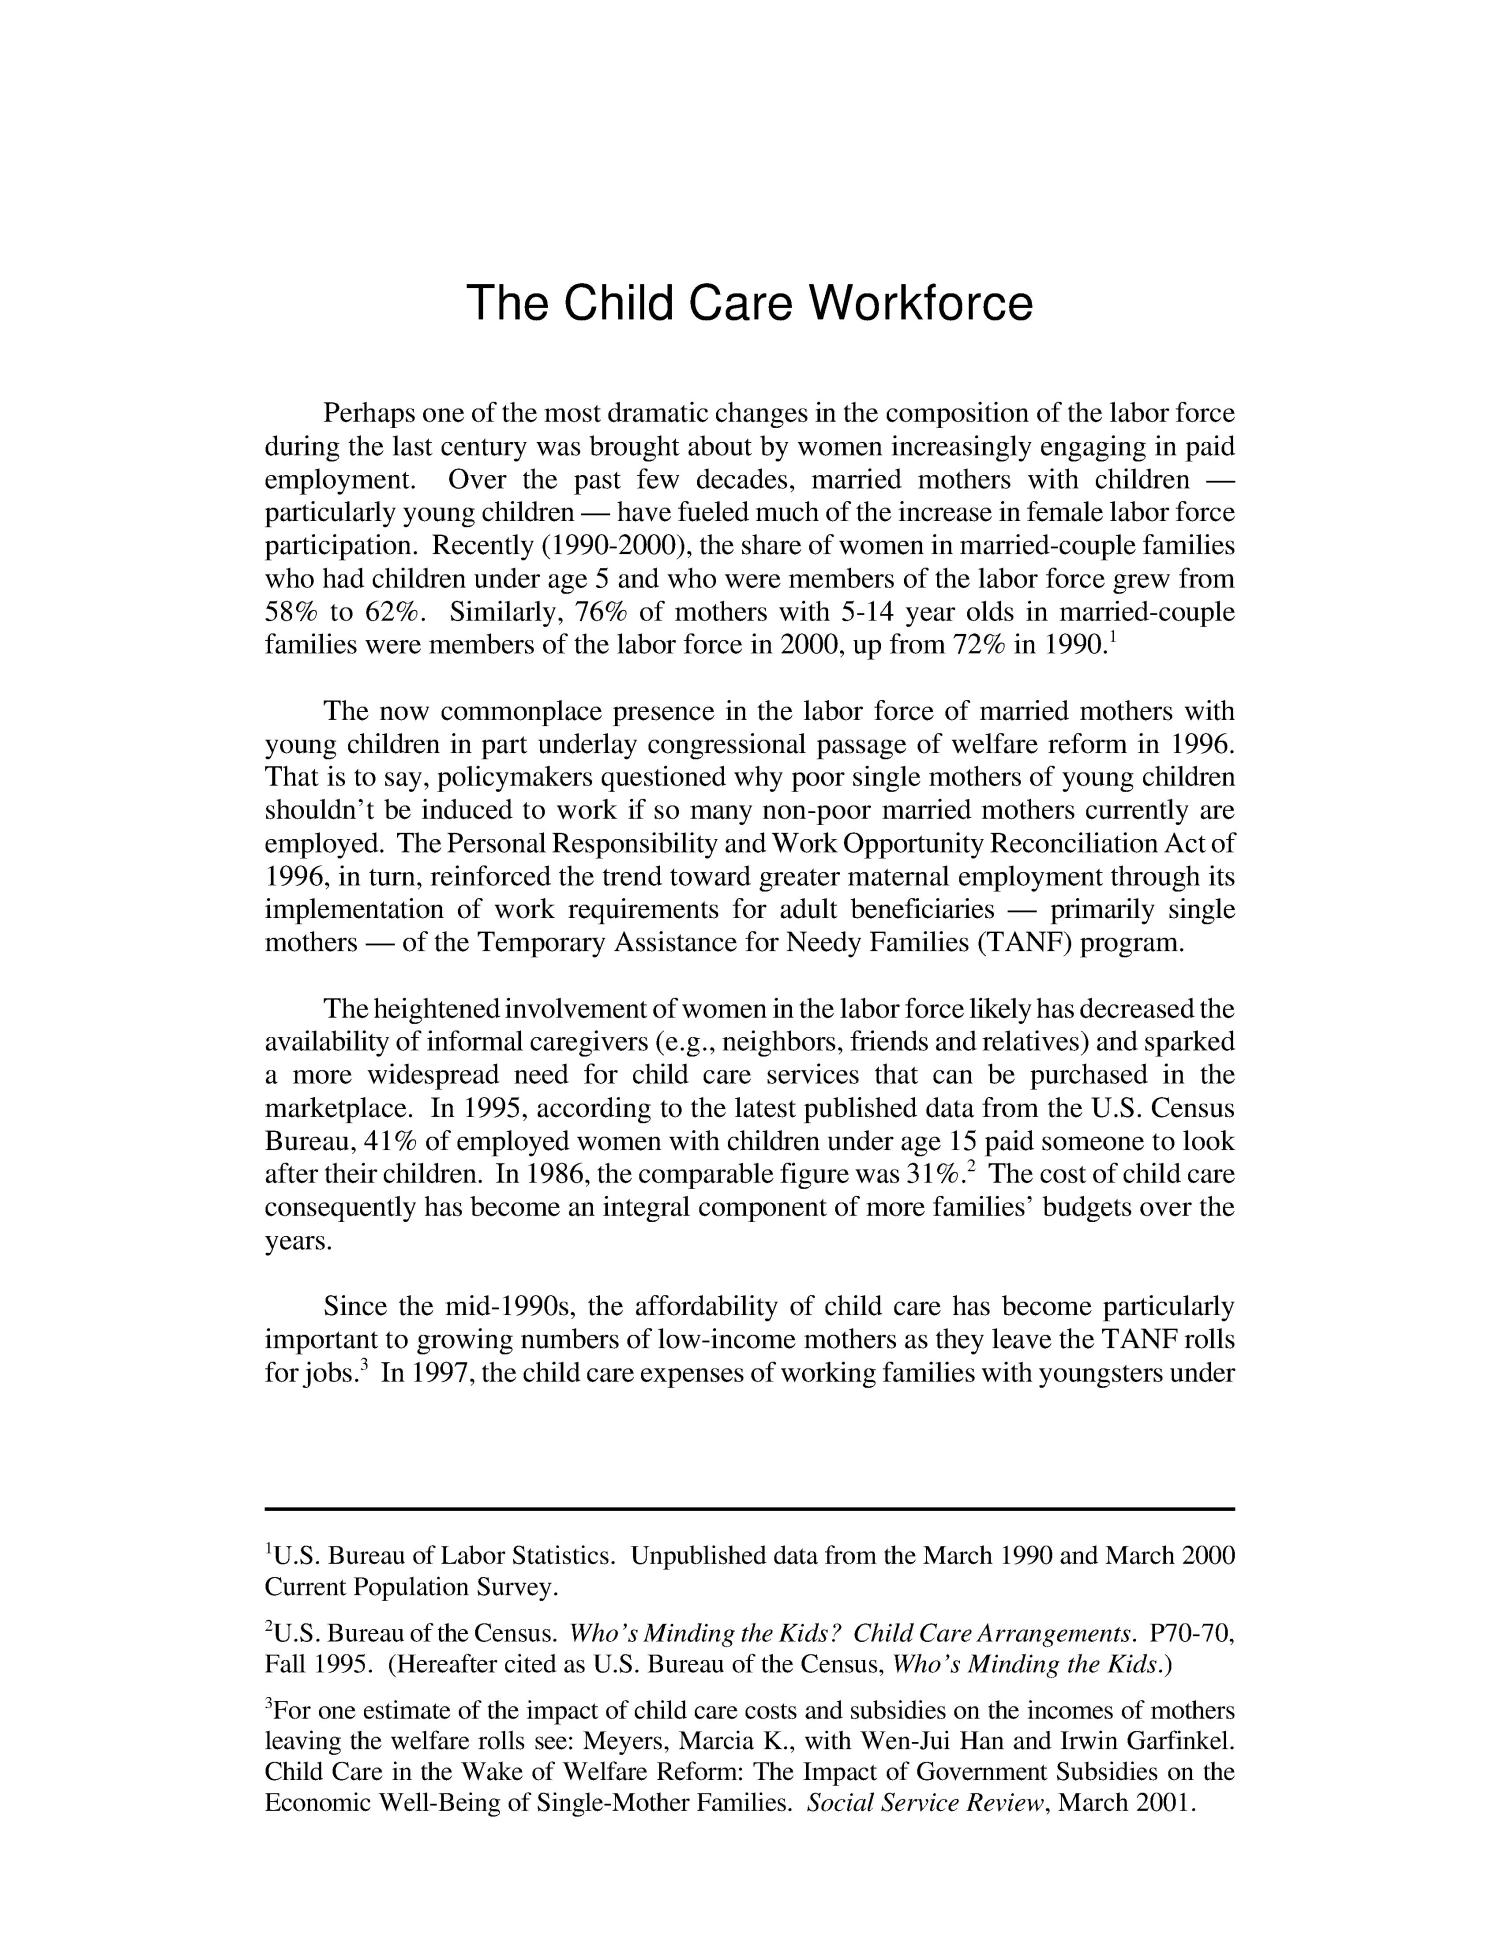 The Child Care Workforce
                                                
                                                    [Sequence #]: 4 of 21
                                                